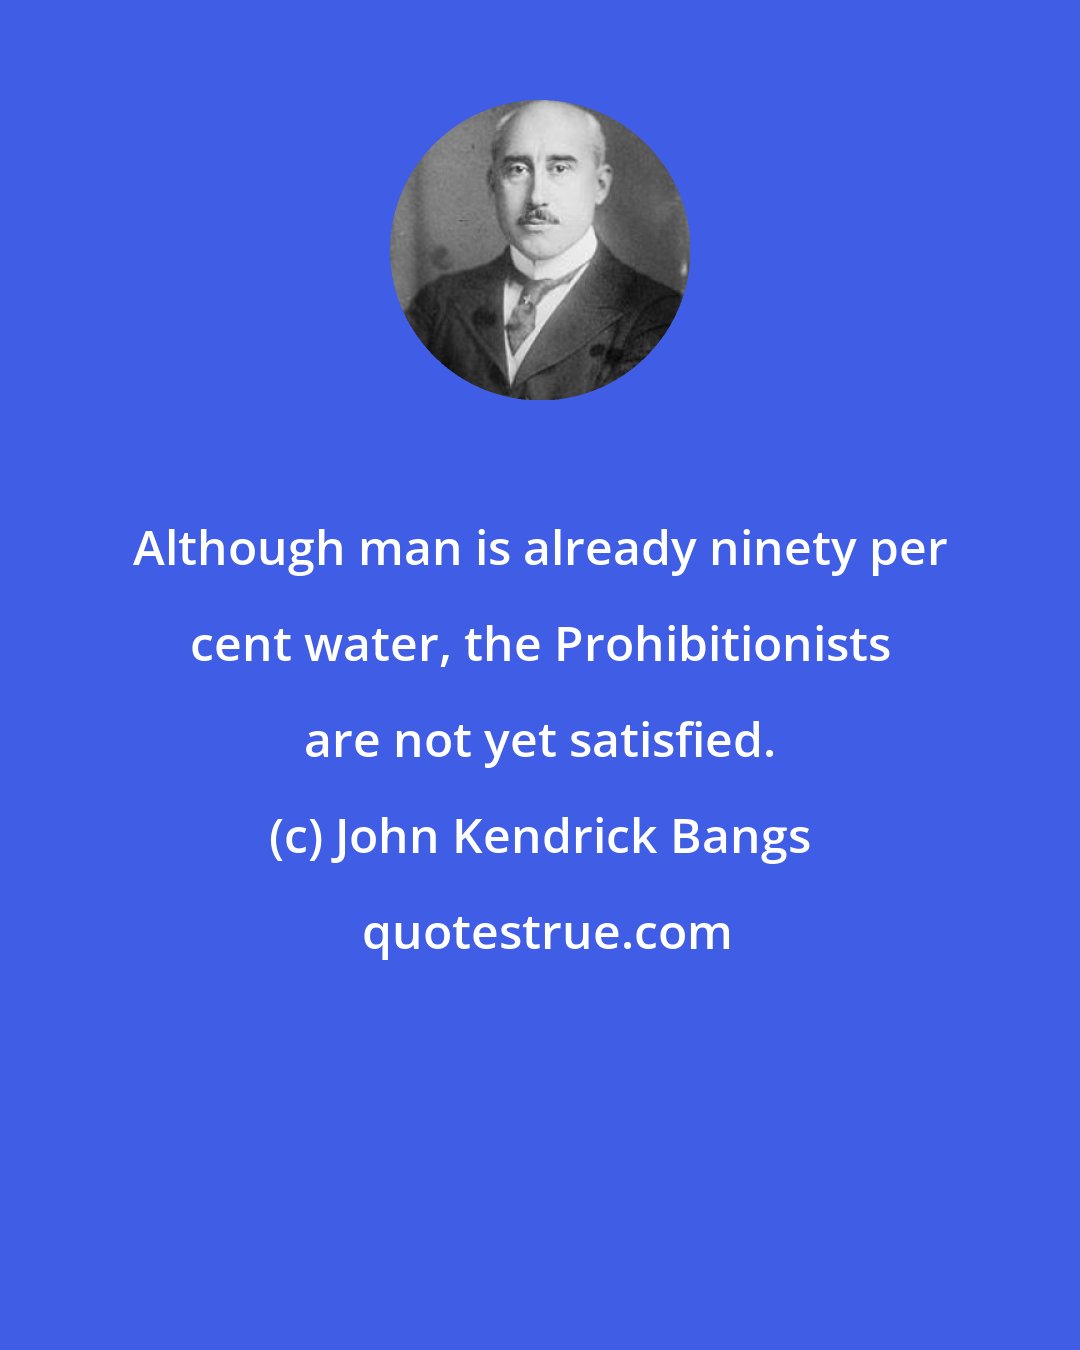 John Kendrick Bangs: Although man is already ninety per cent water, the Prohibitionists are not yet satisfied.